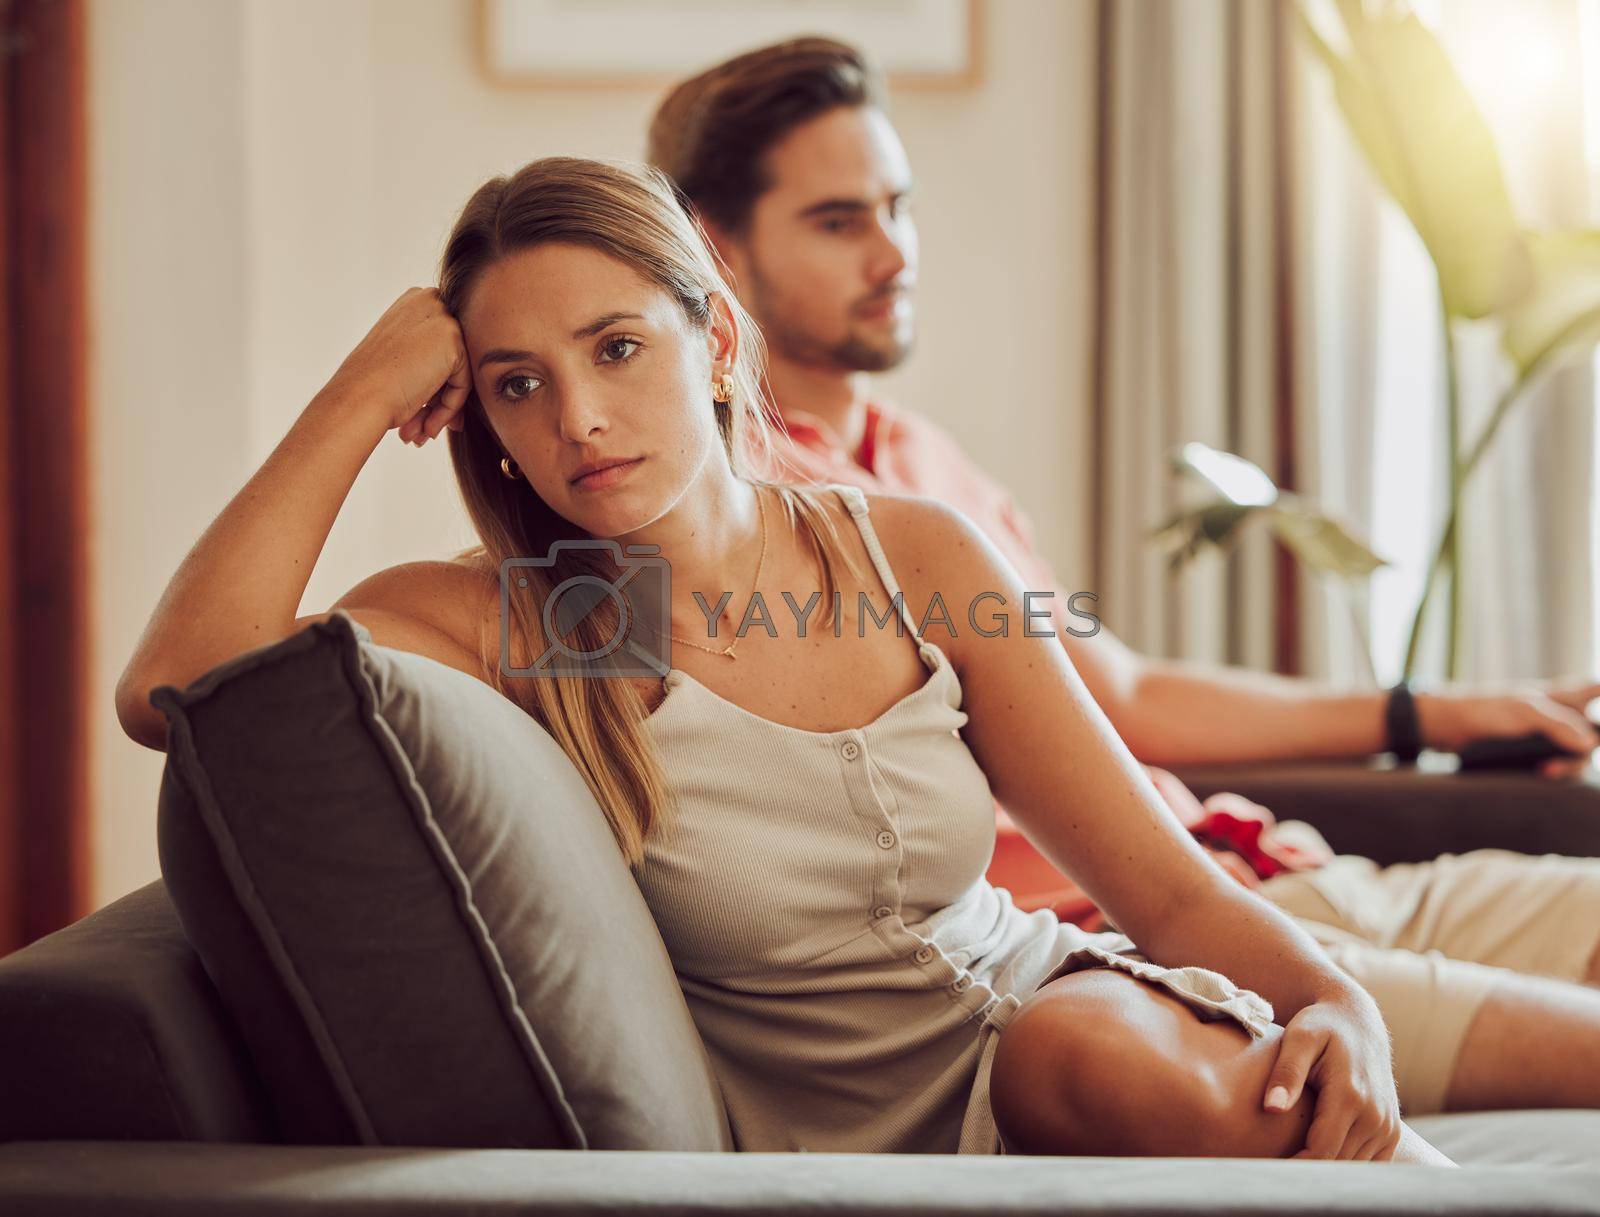 Royalty free image of Unhappy, sad and annoyed couple after a fight and are angry at each other while sitting on a couch at home. A woman is stressed, upset and frustrated by her boyfriend after an argument by YuriArcurs